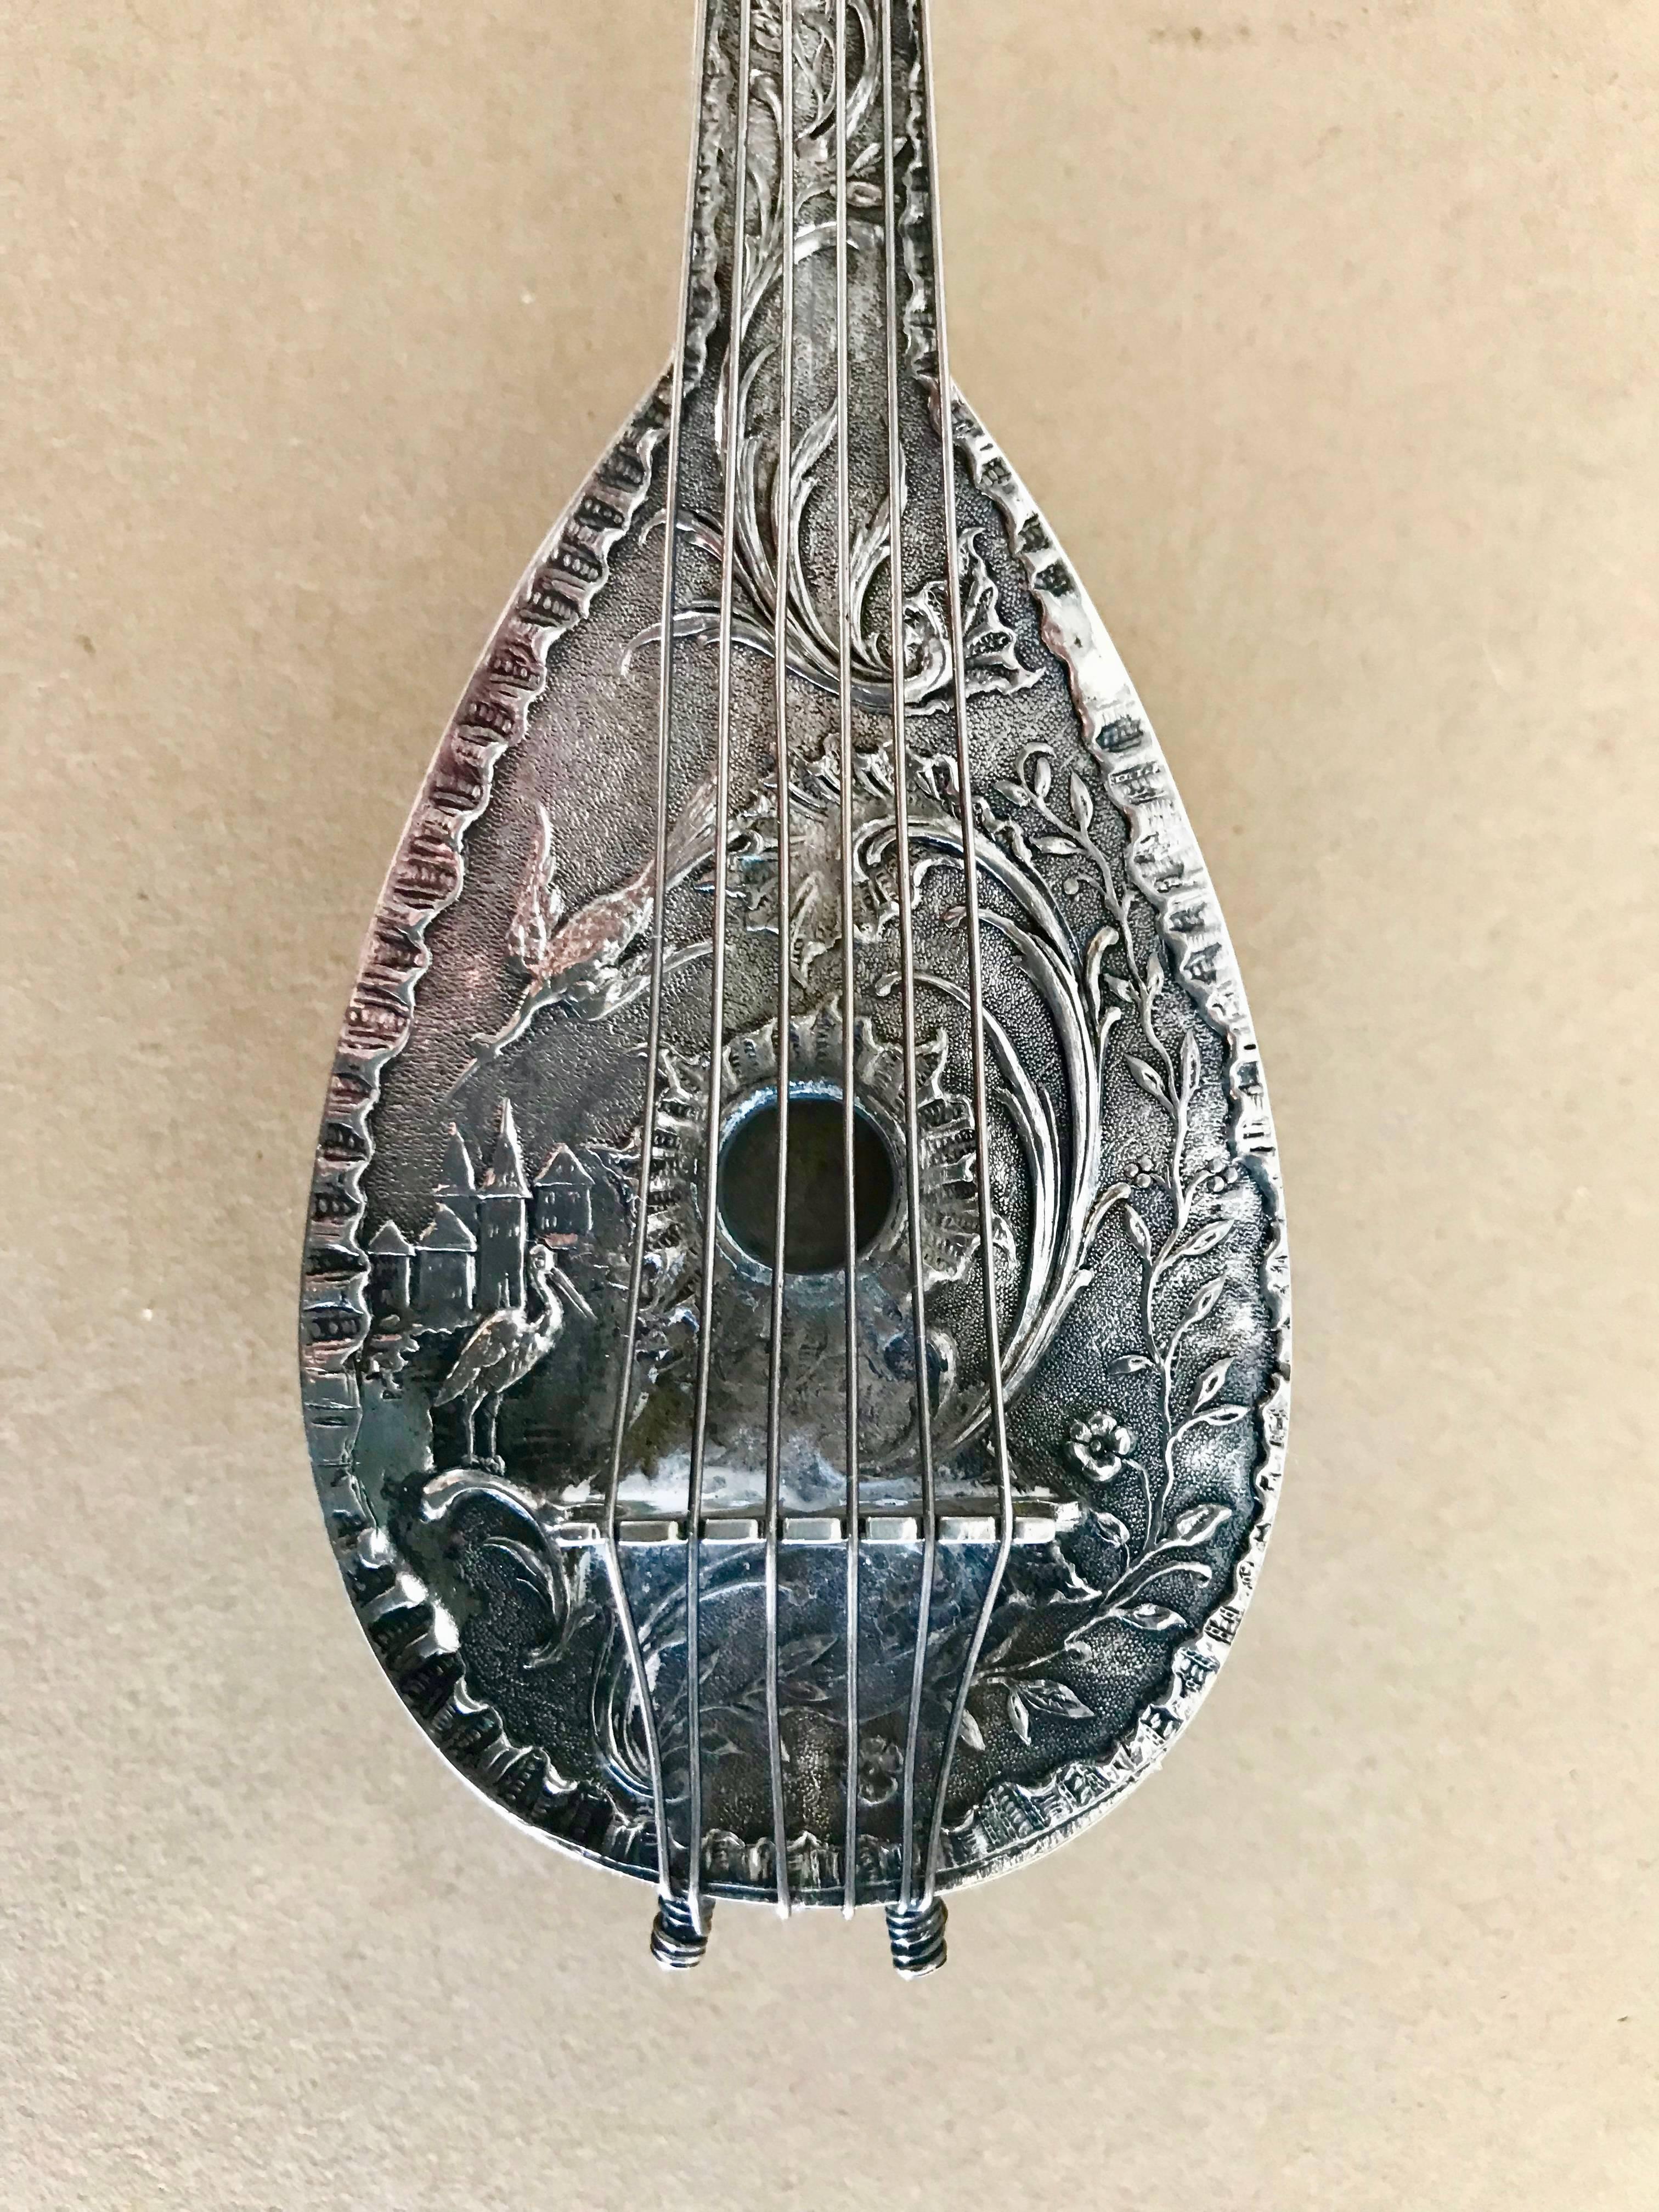 Dutch silver flask in the form of a mandolin with intricate Baroque style decoration, including cranes and a castle among floral arabesques on the front. The reverse depicting a charming scene influenced by Dutch old master genre paintings of two